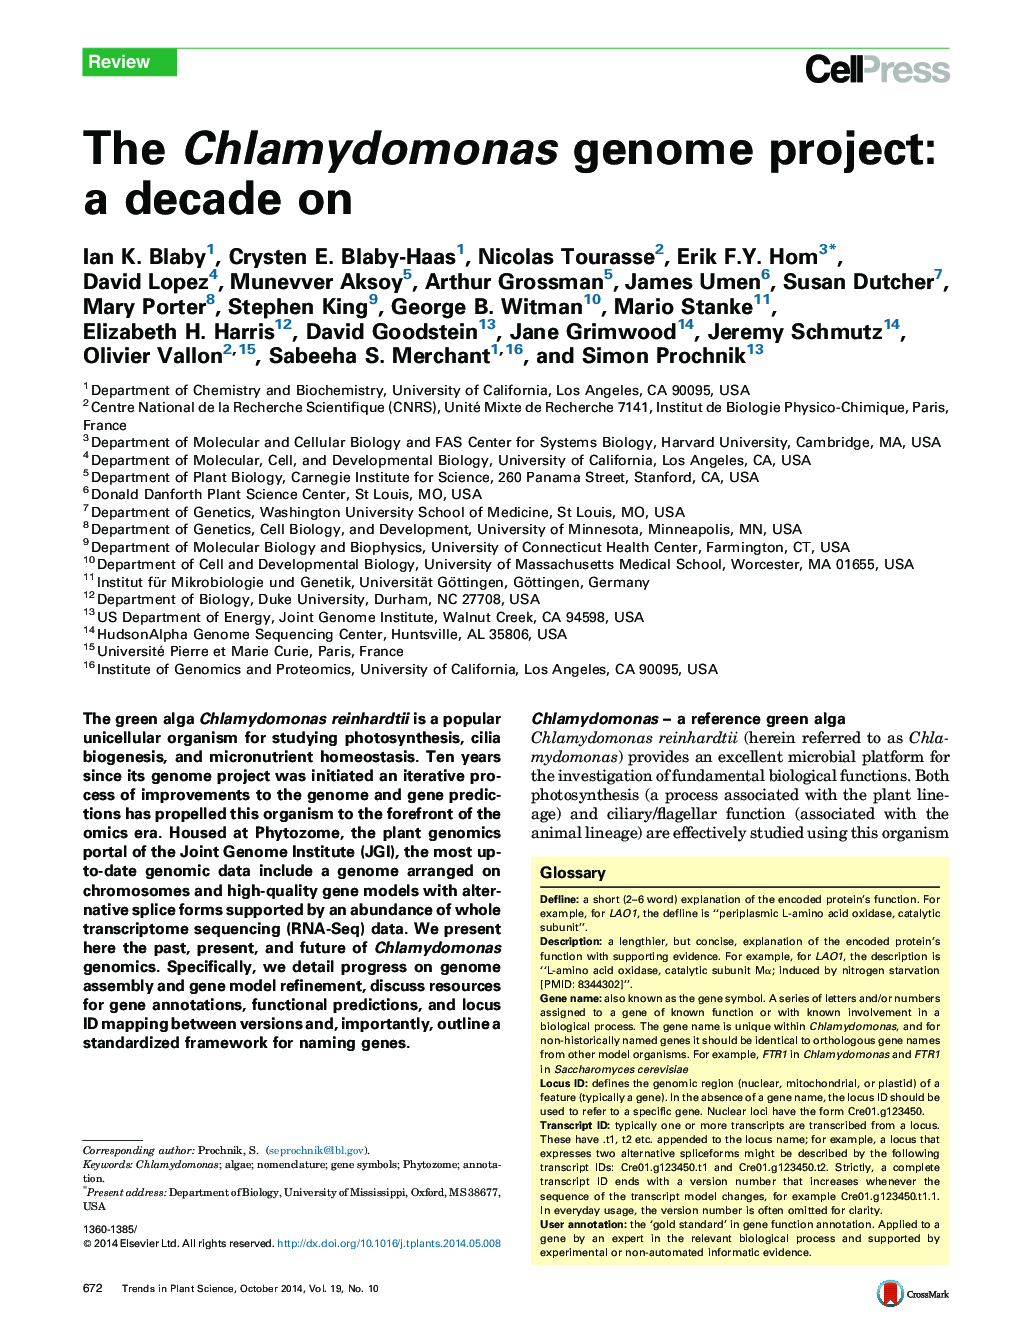 The Chlamydomonas genome project: a decade on